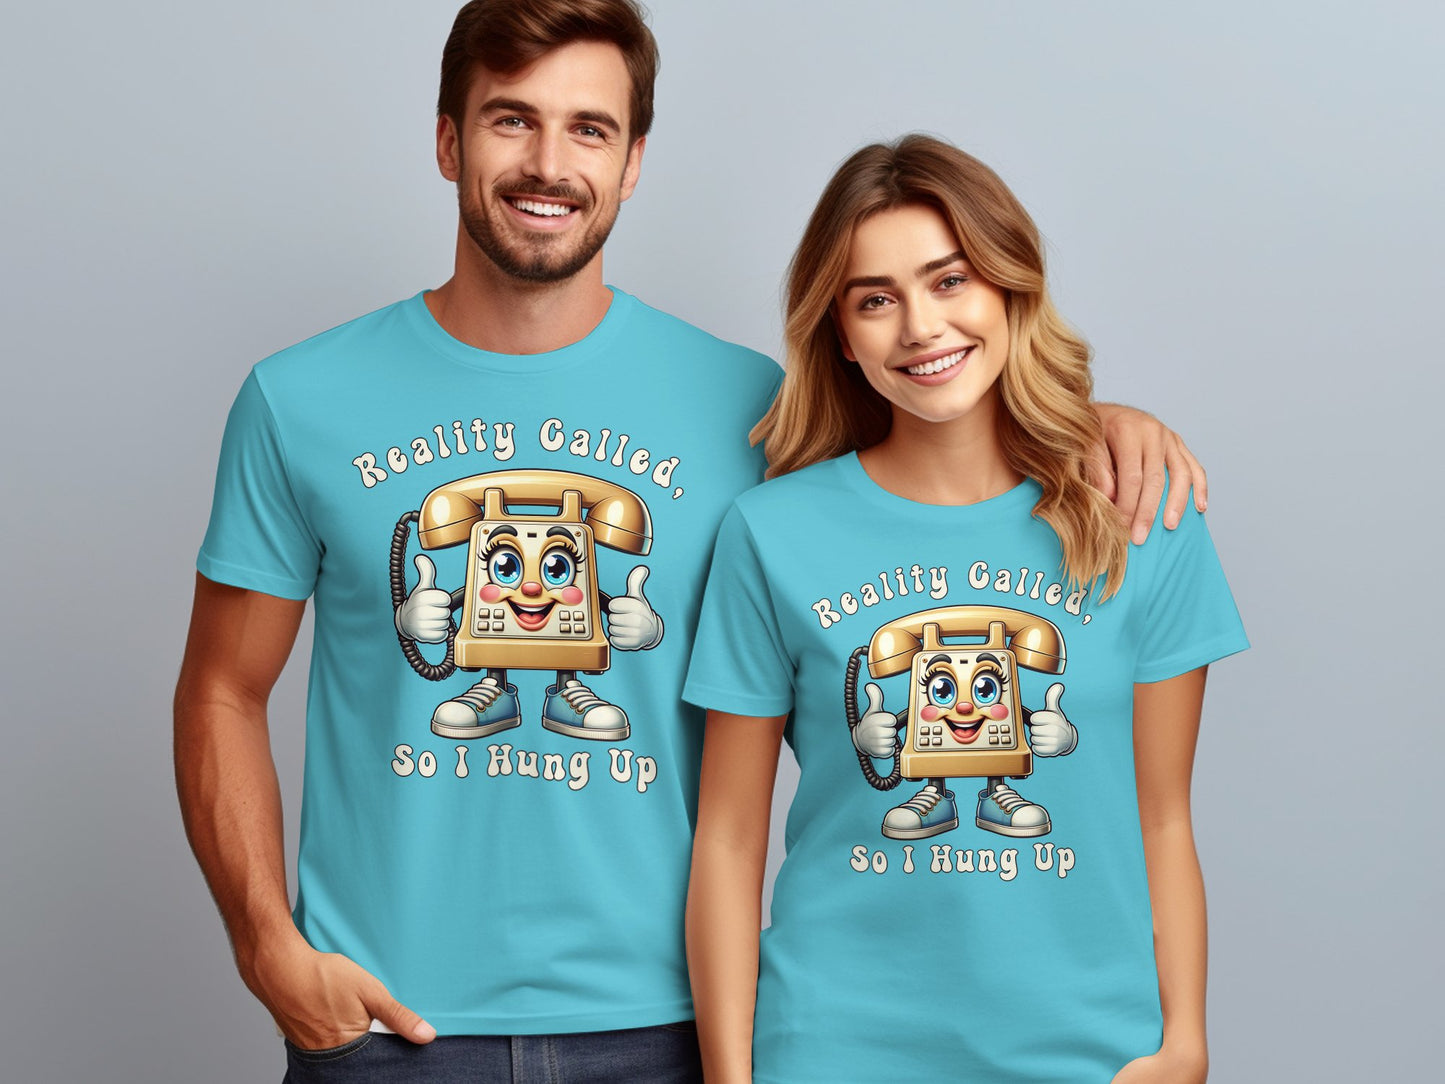 Funny Reality Called So I Hung Up T-Shirt, Quirky Telephone Graphic Tee, Unisex Casual Shirt for Everyday Wear, Comfy Cotton Top